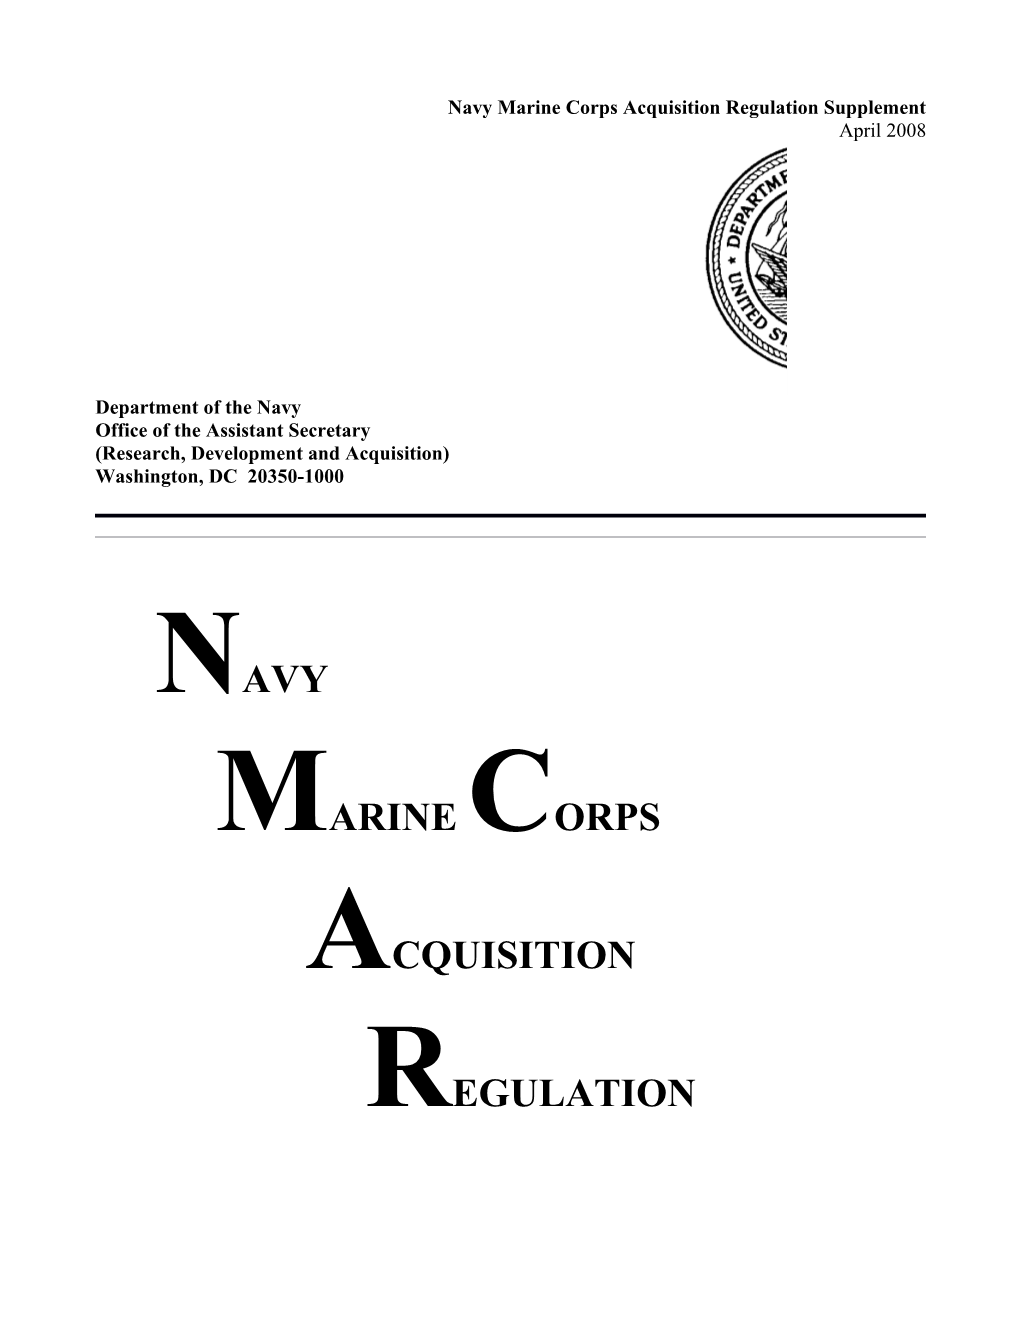 Change 08-10 to the Navy Marine Corps Acquisition Regulation Supplement (NMCARS) (A. H